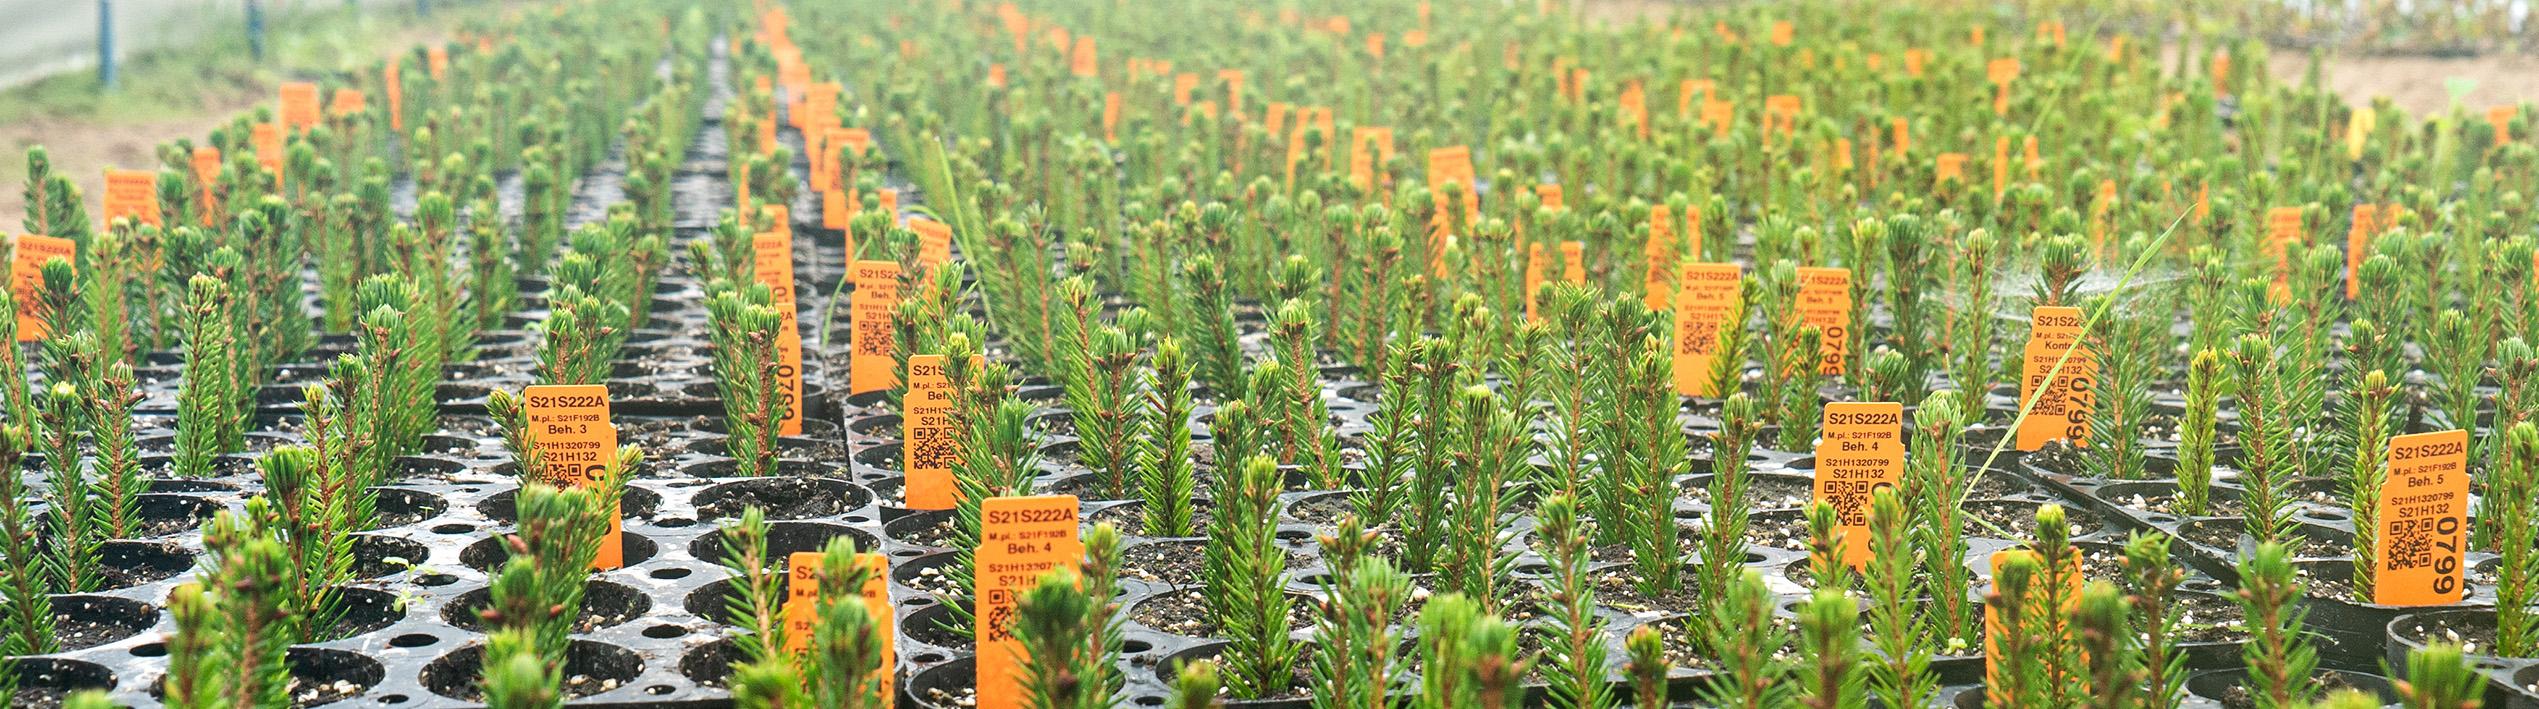 long rows of seedlings of spruce growing in a greenhouse 